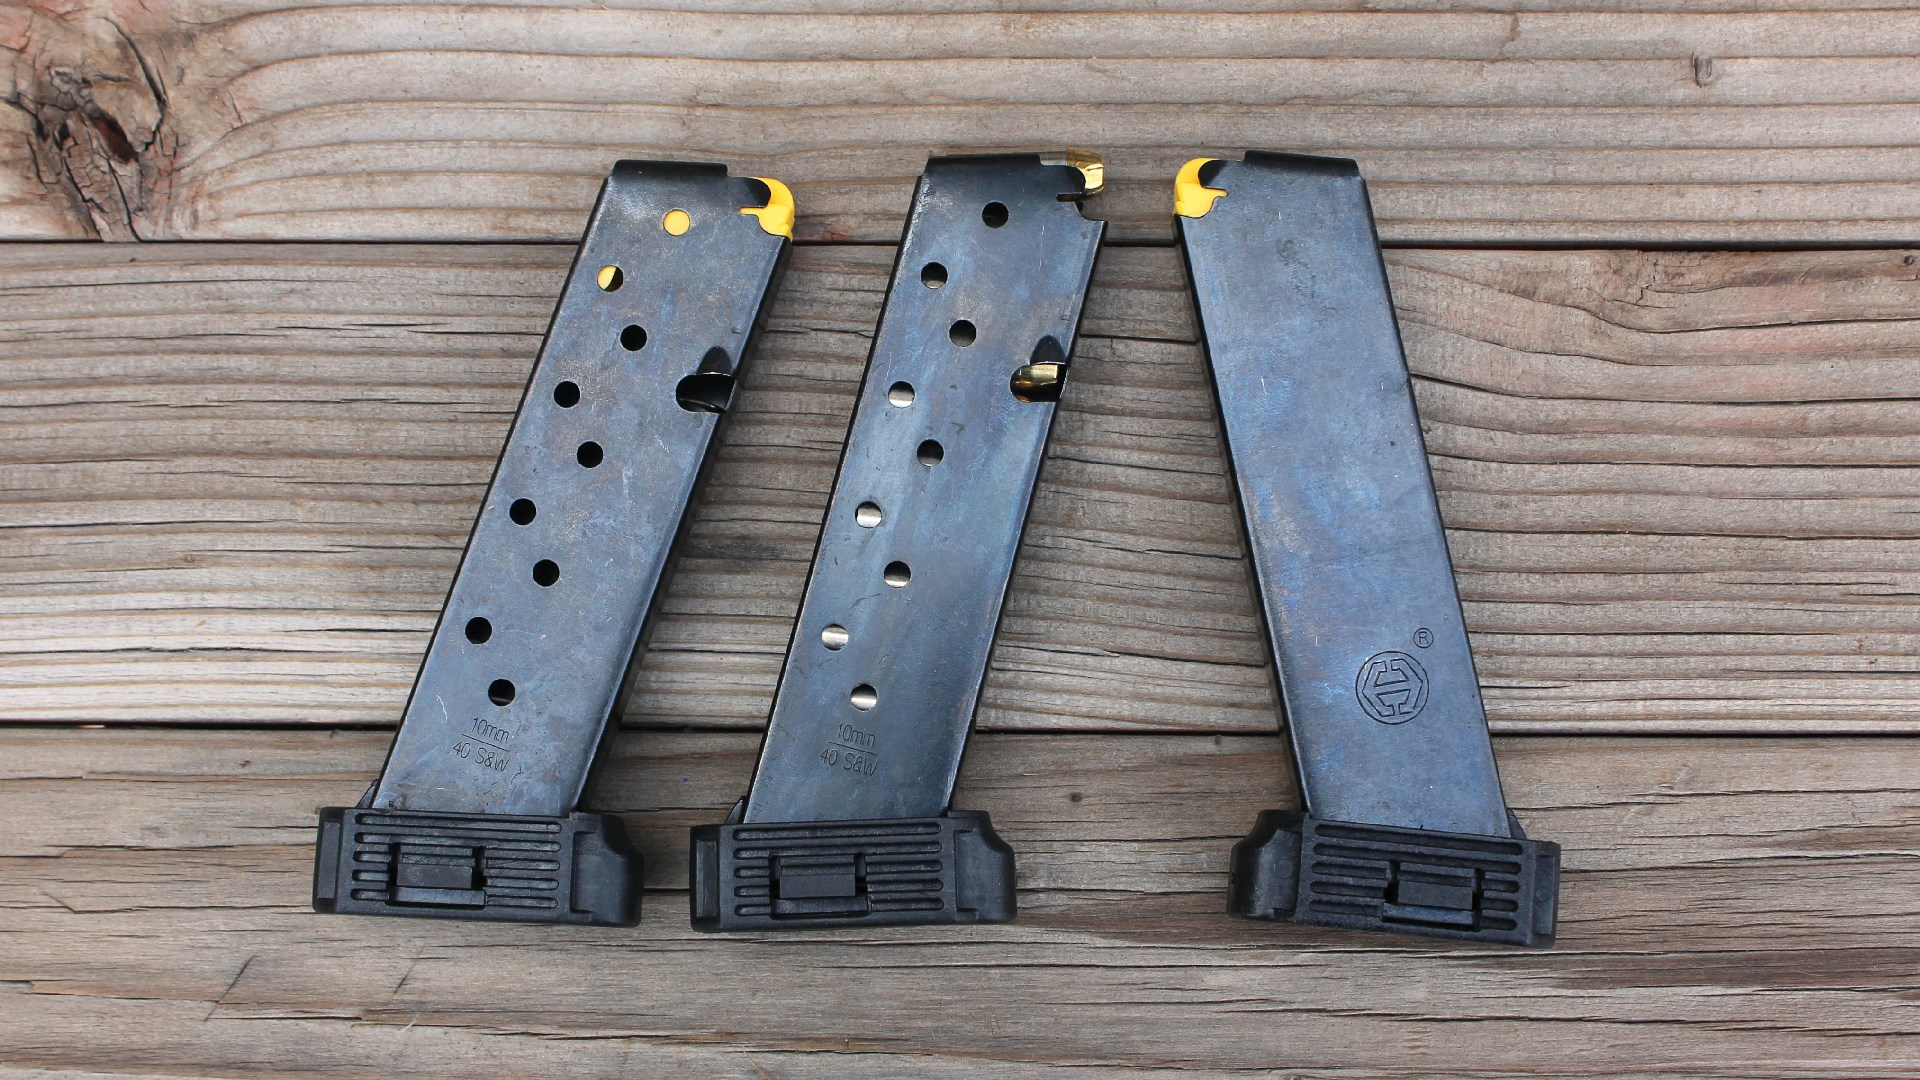 three detachable box magazines with yellow followers inserted and extended plastic baseplates shown on wood boards